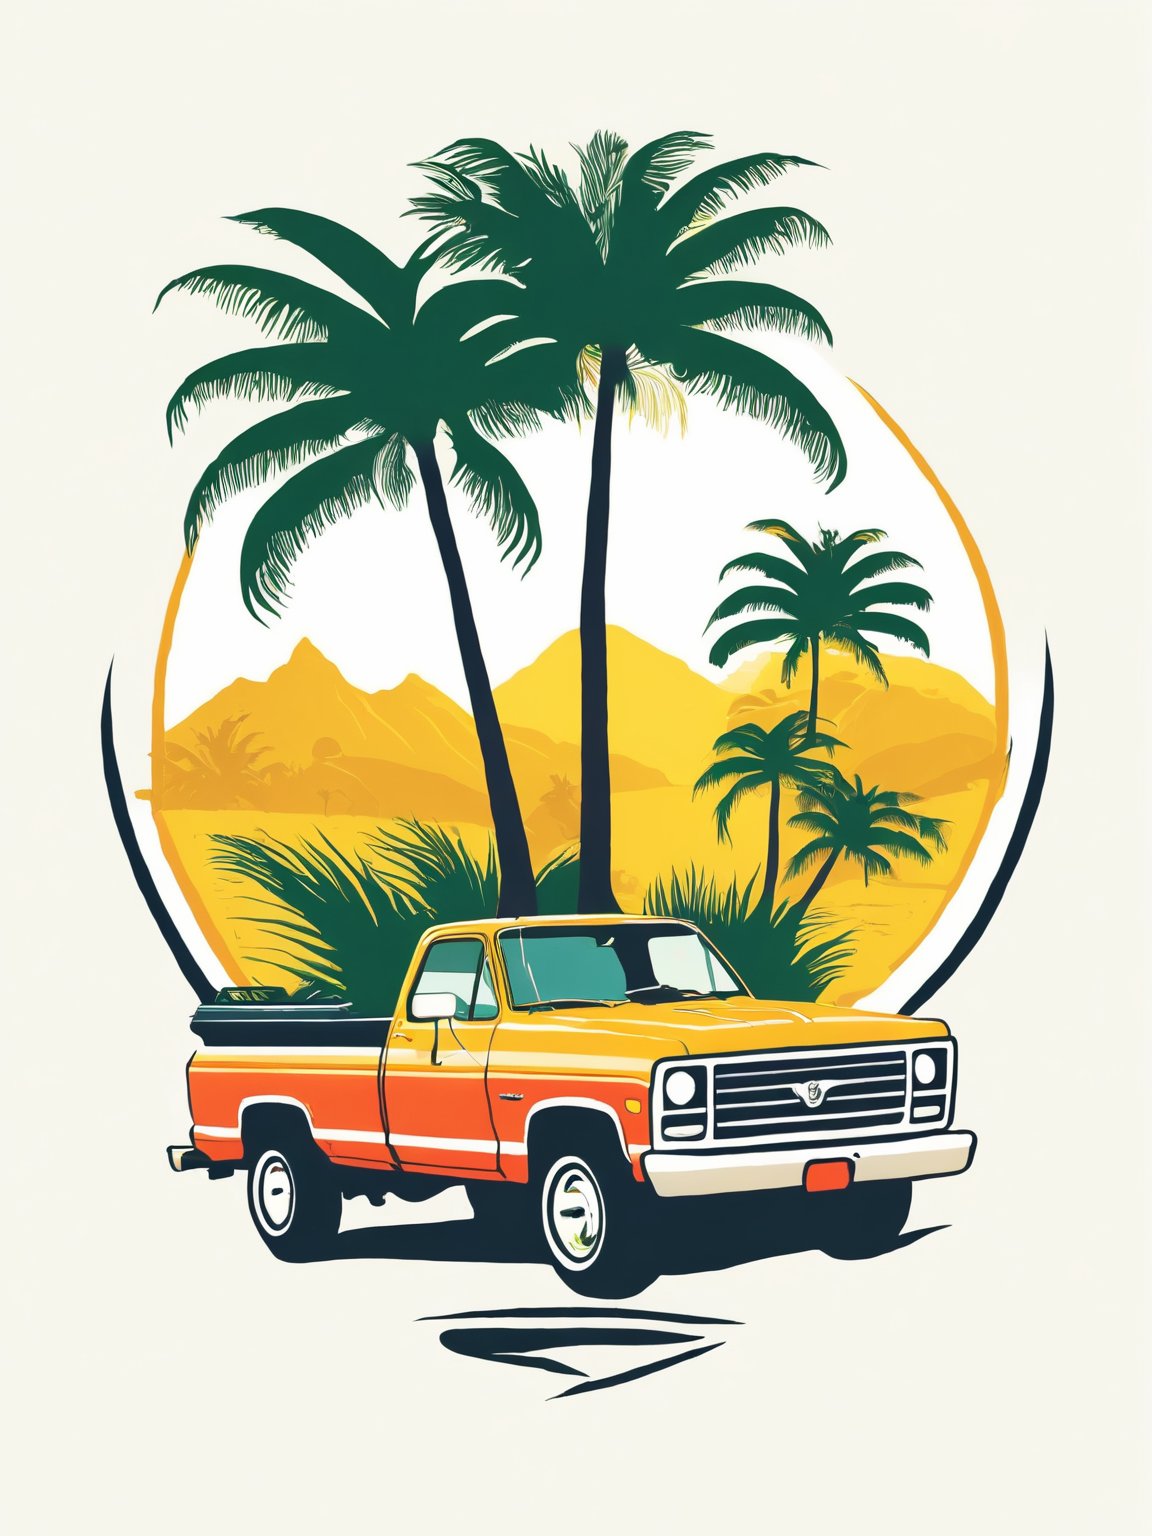 AiArtV,t-shirt design, outdoors,tree,ground vehicle,motor vehicle,palm tree,car,vehicle focus,truck,white background,vector illustration